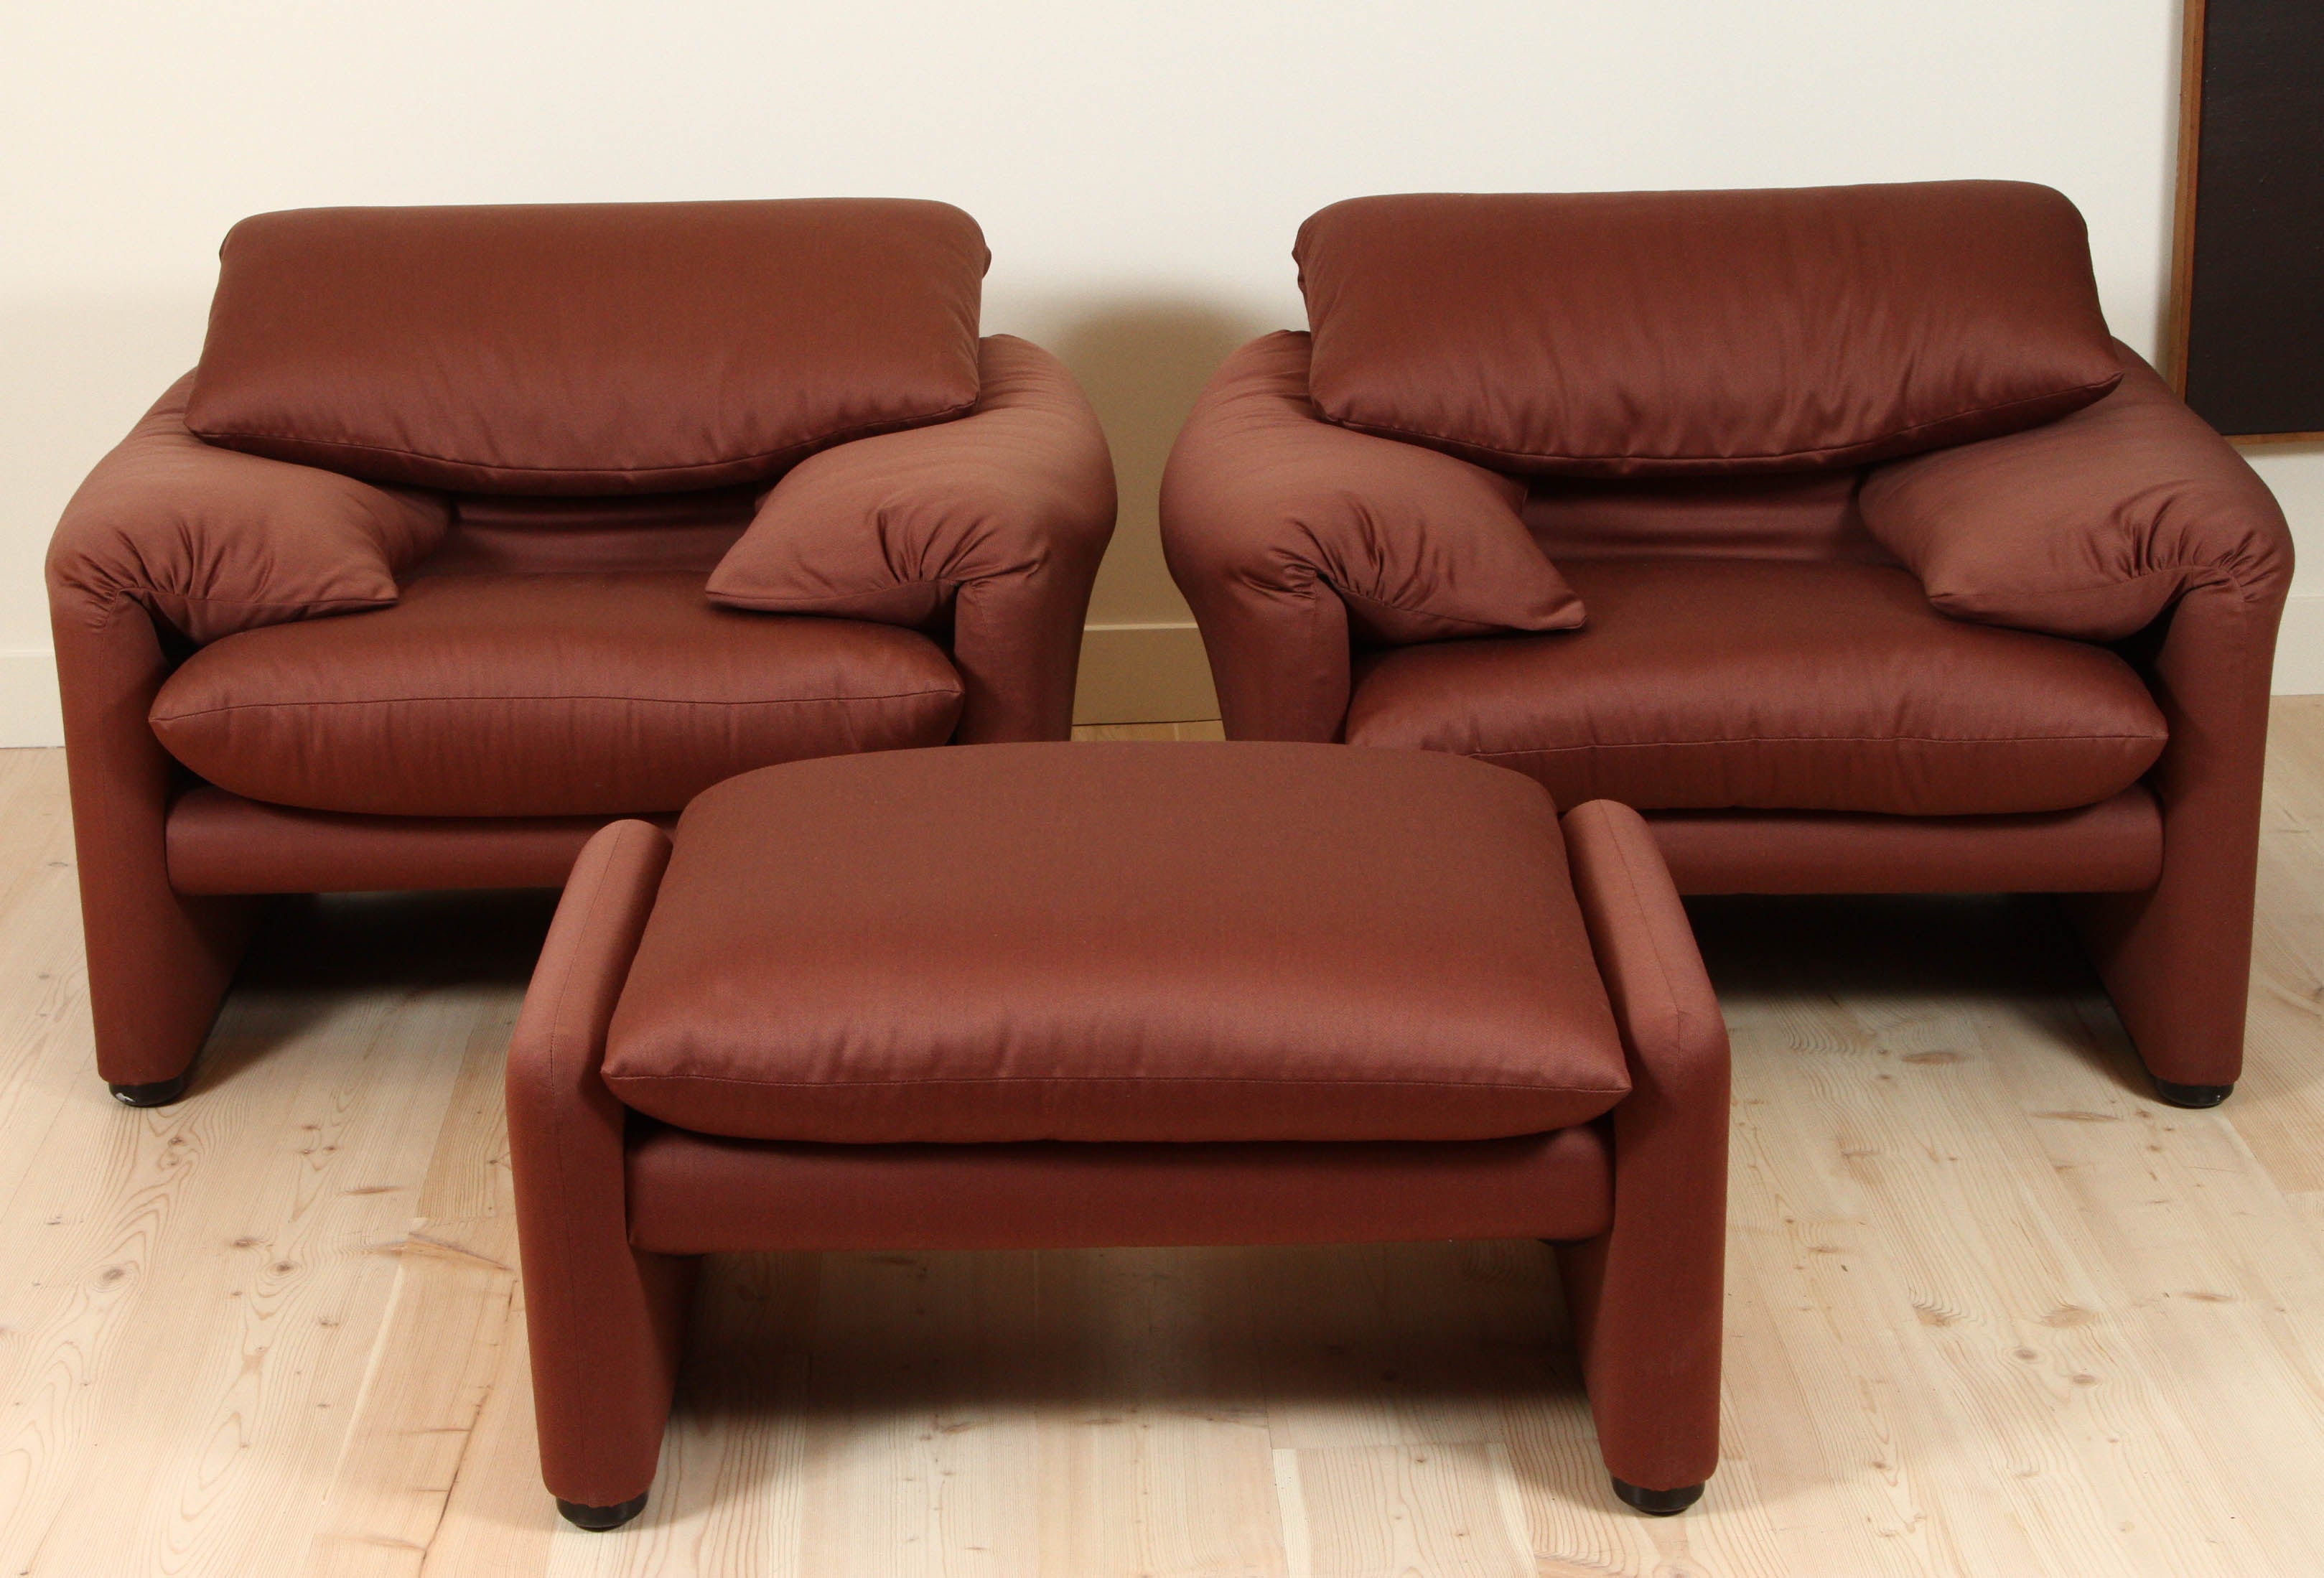 Pair of "Maralunga" Lounge Chairs and Ottoman by Vico Magistretti